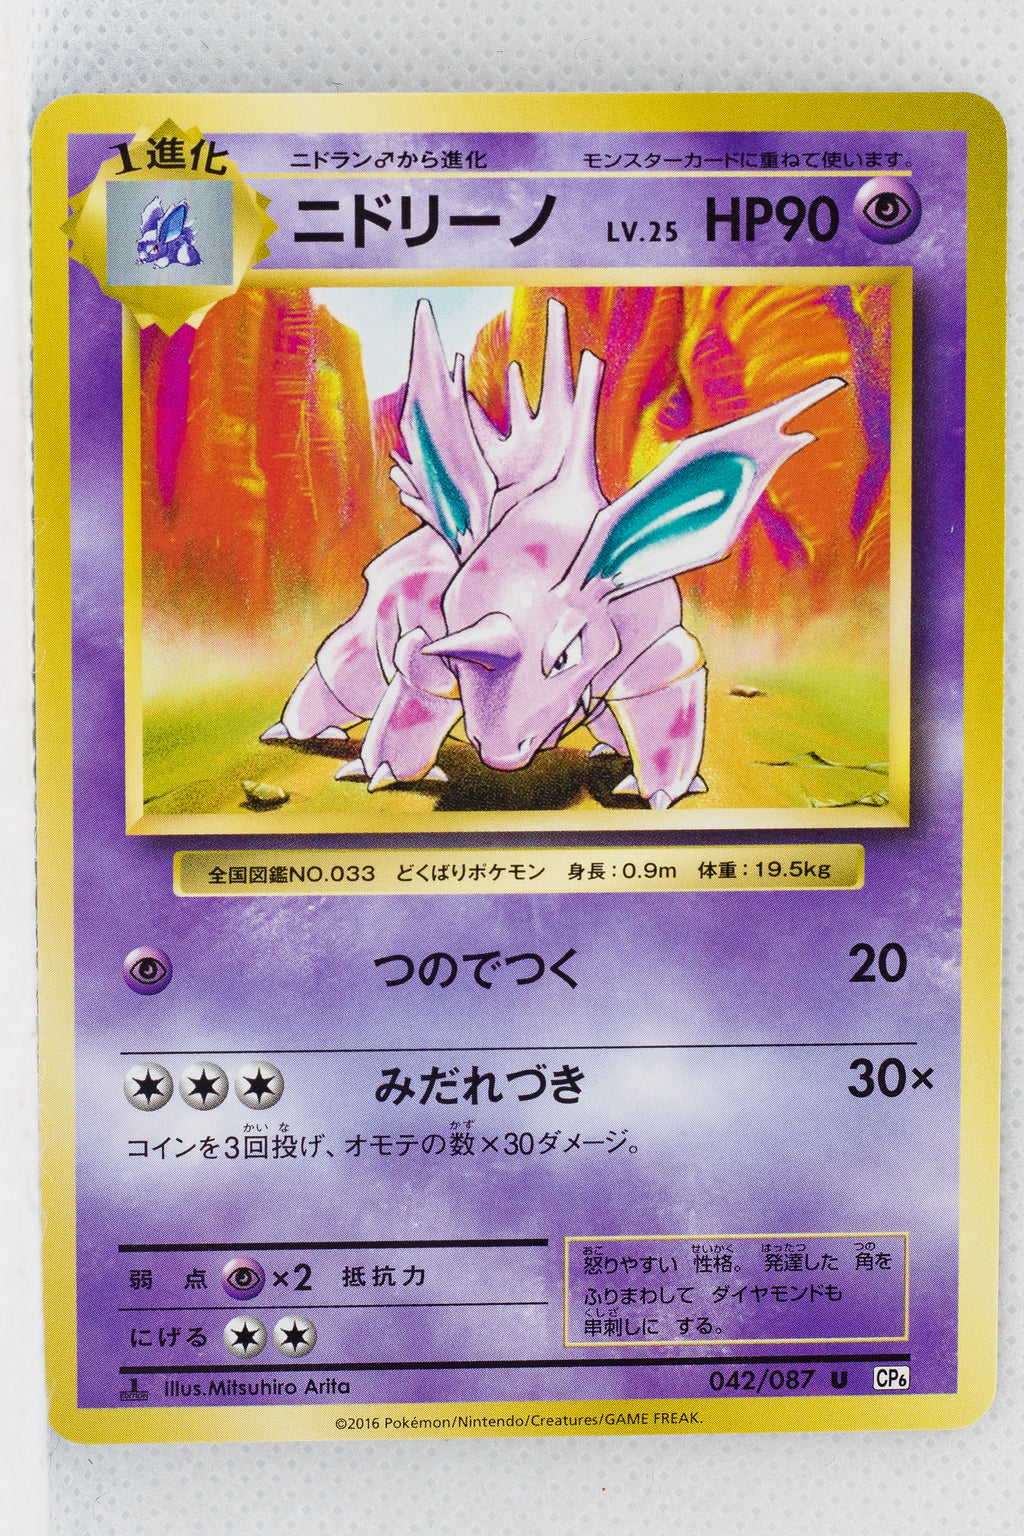 Xy Cp6 Expansion Pack th 042 087 Nidorino 1st Edition Thecardcollector Uk